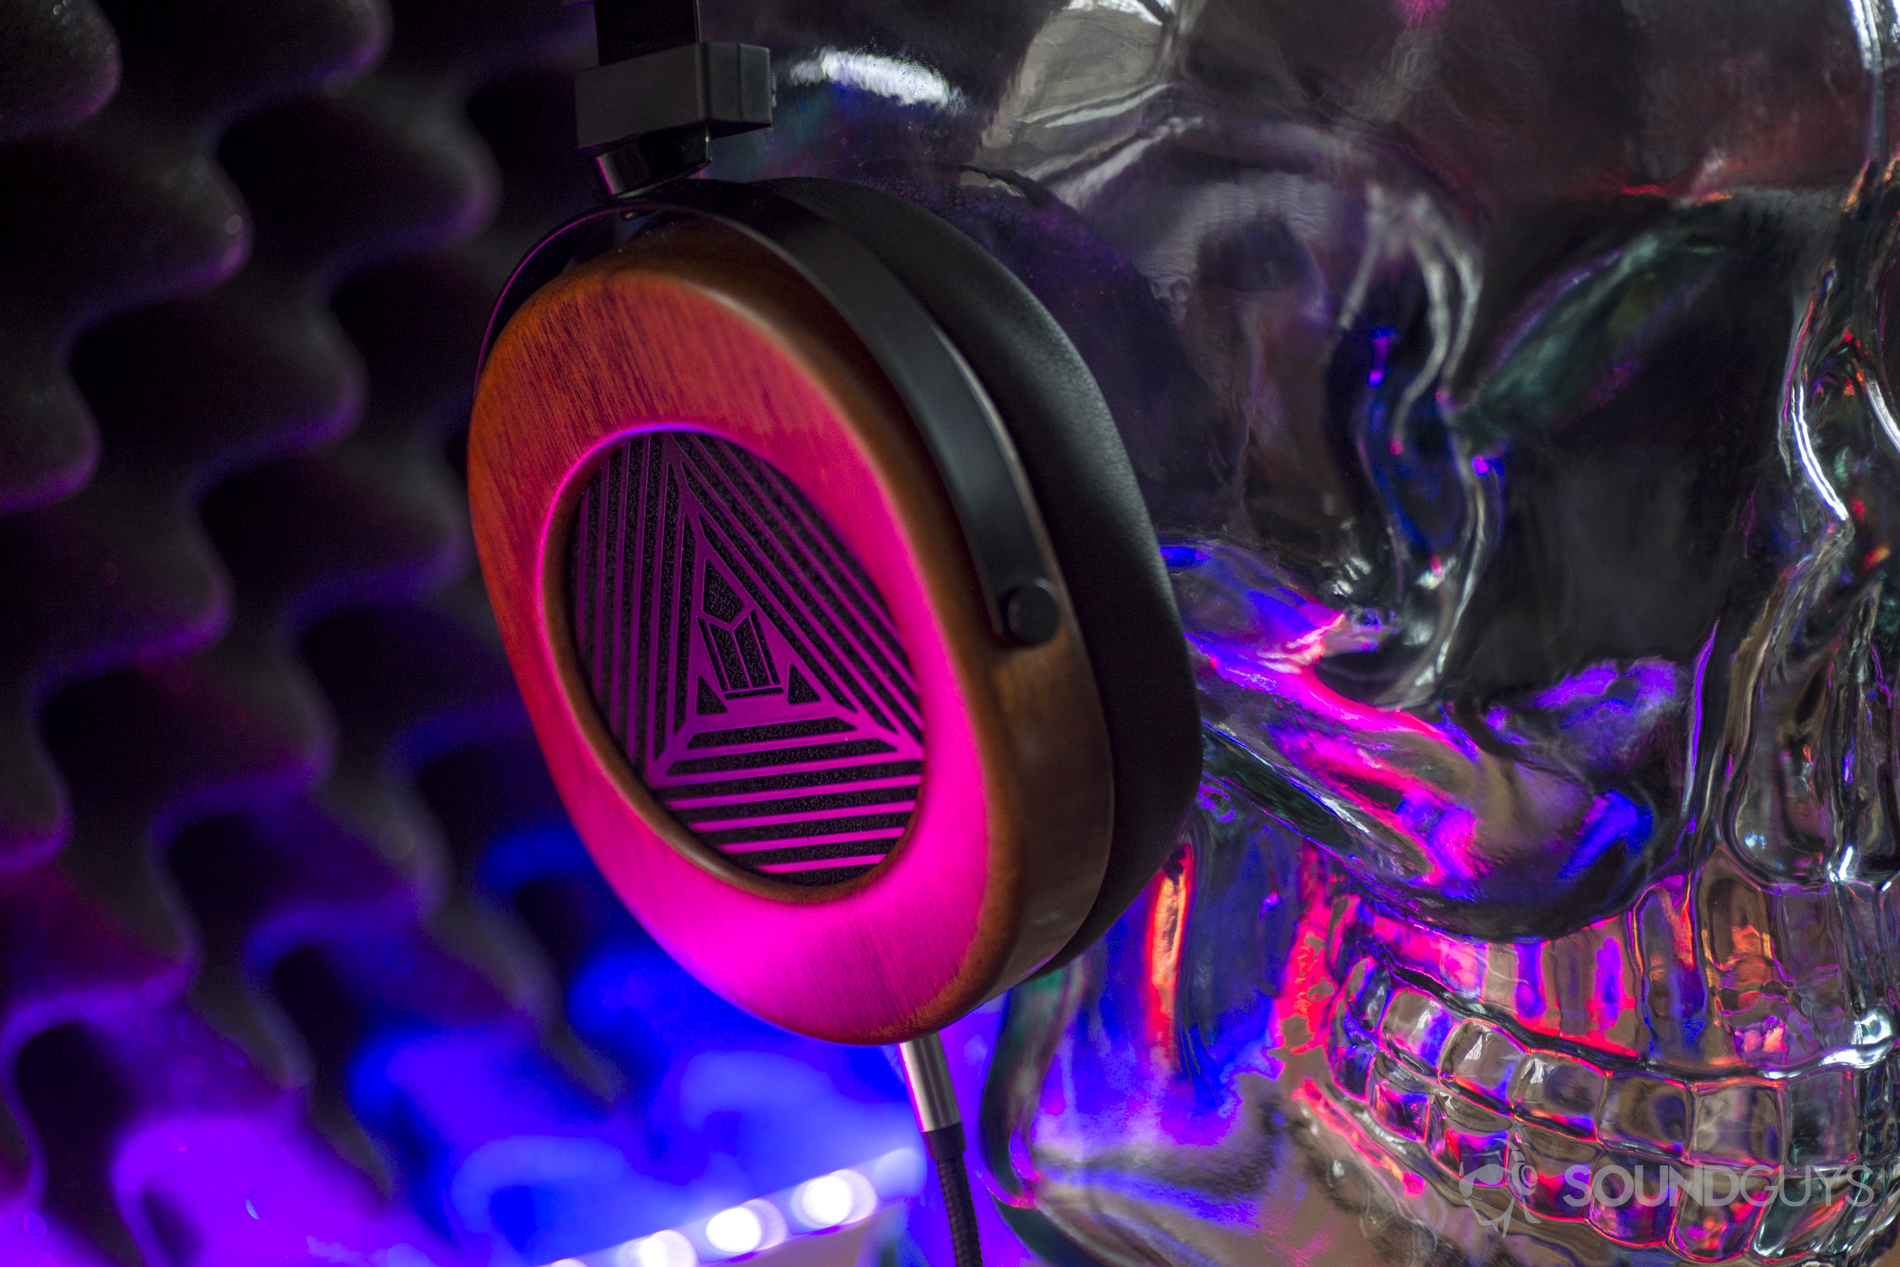 A photo of the Monoprice Monolith M565 on a glass dummy head, illuminated by colored LED light.